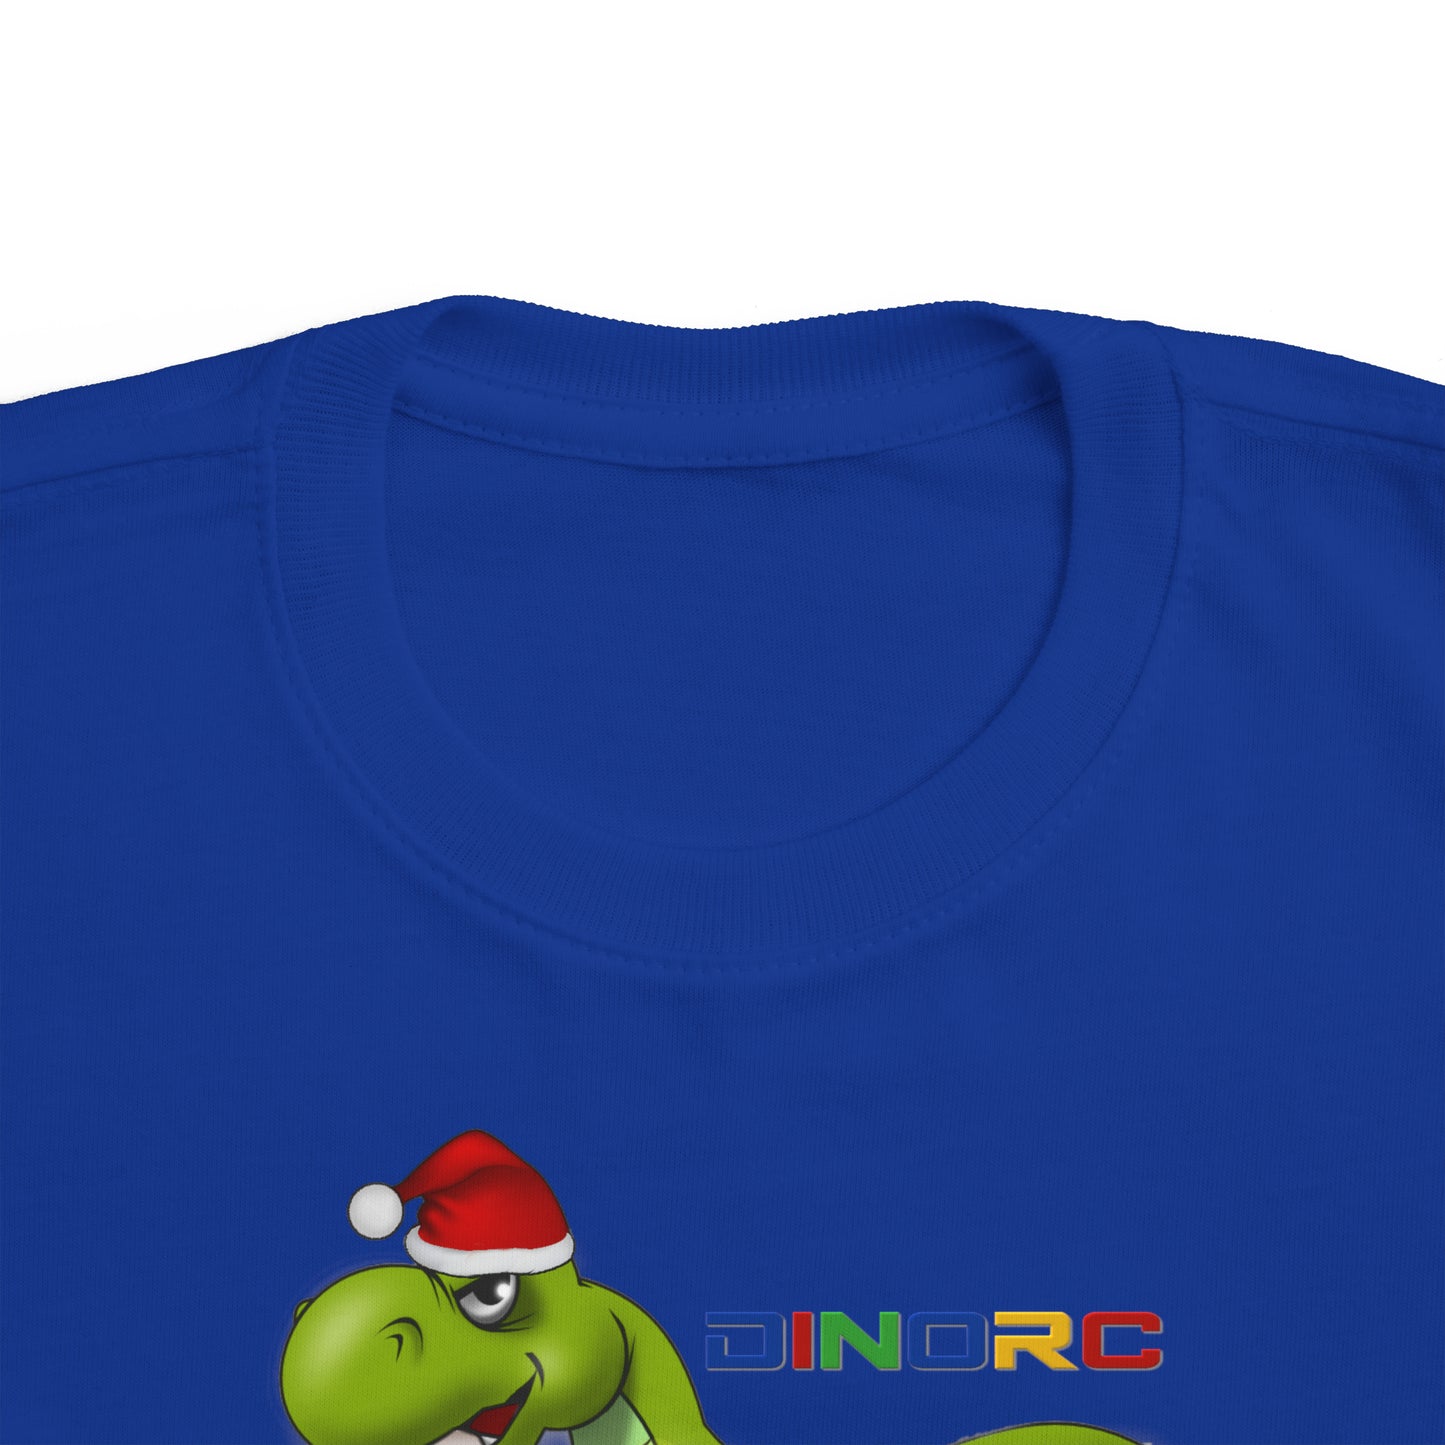 Merry Christmas DinoRC Christmas Toddler's Fine Jersey Tee